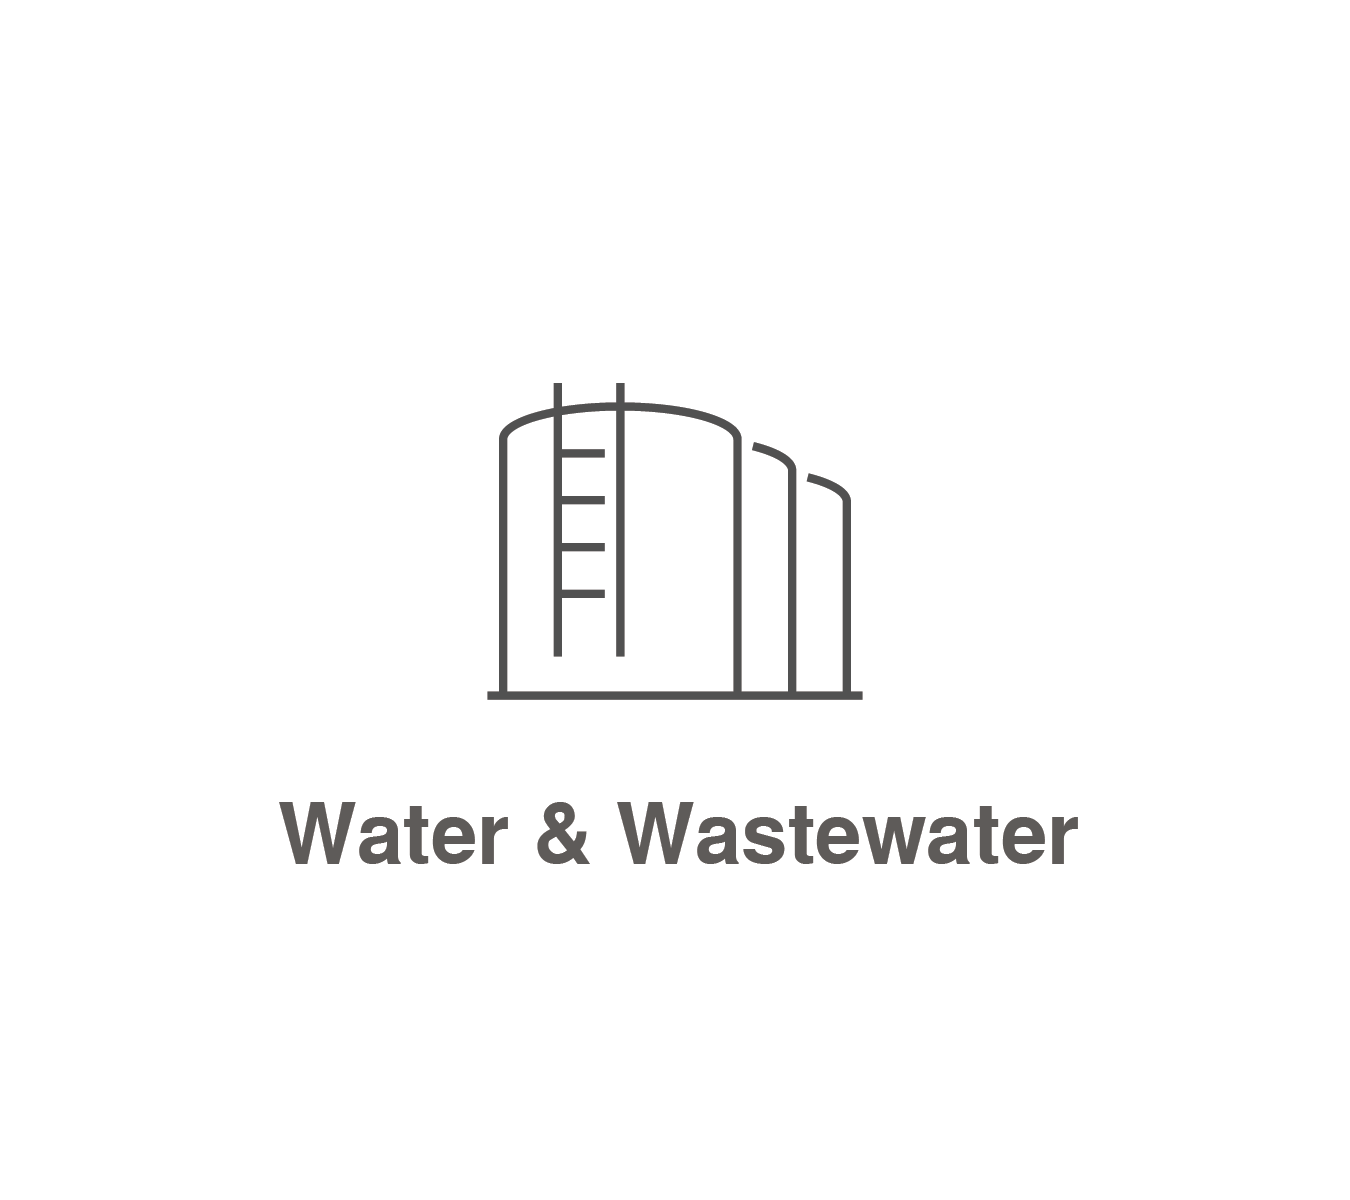 Wastewater Logo - Reliability for Water & Wastewater - PinnacleART